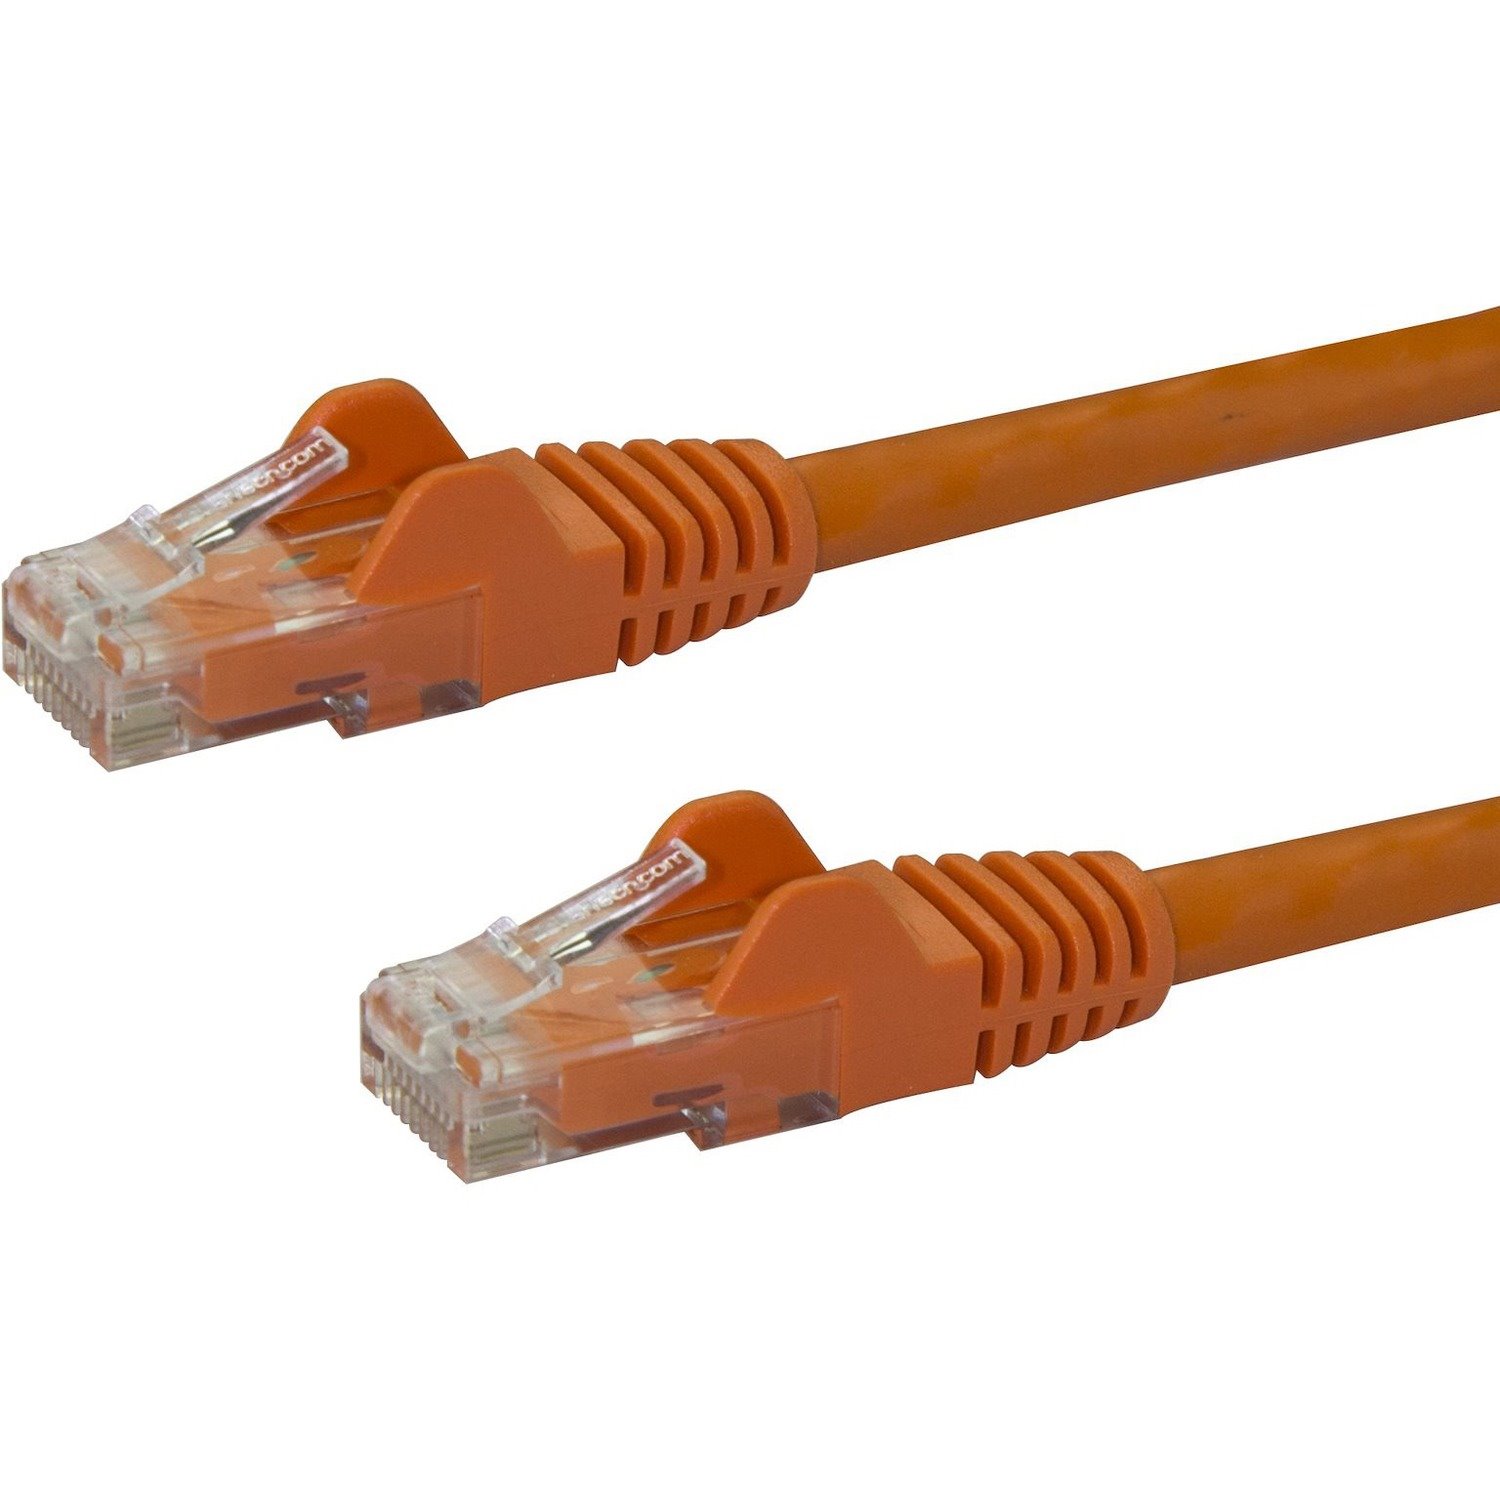 StarTech.com 6ft CAT6 Ethernet Cable - Orange Snagless Gigabit - 100W PoE UTP 650MHz Category 6 Patch Cord UL Certified Wiring/TIA